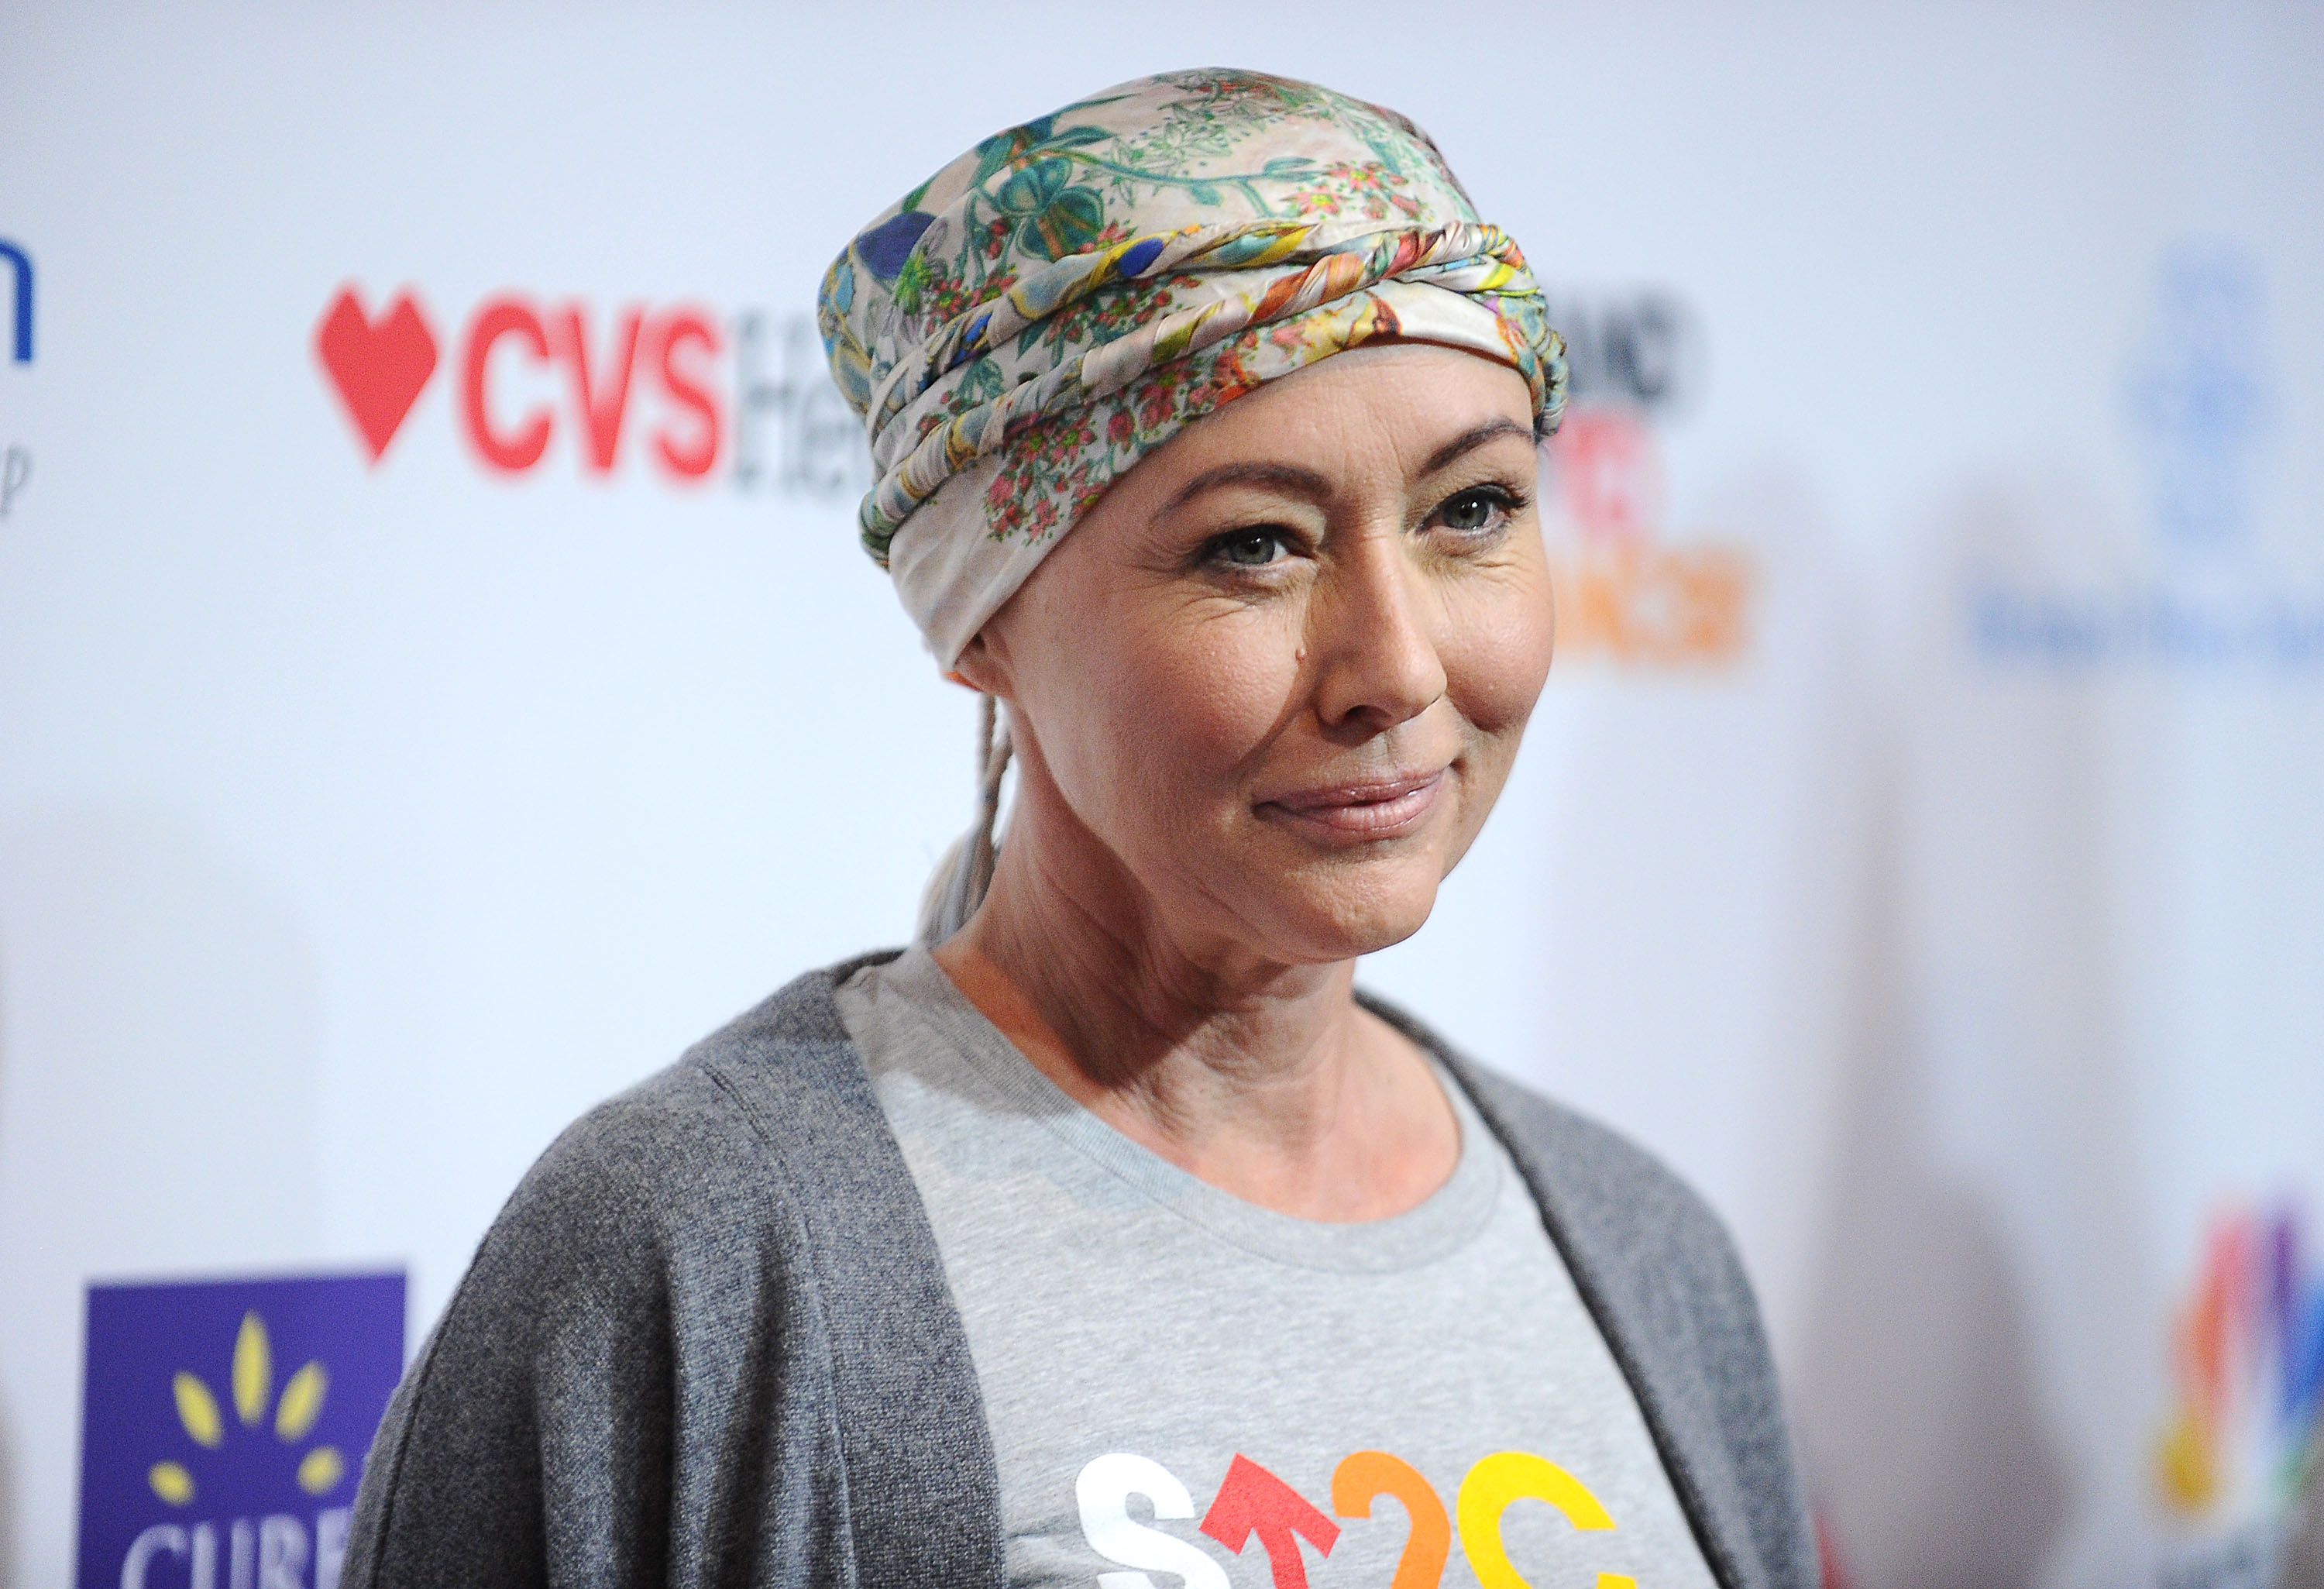 The Beverly Hills, 90210 actress was diagnosed with stage 4 breast cancer in 2015